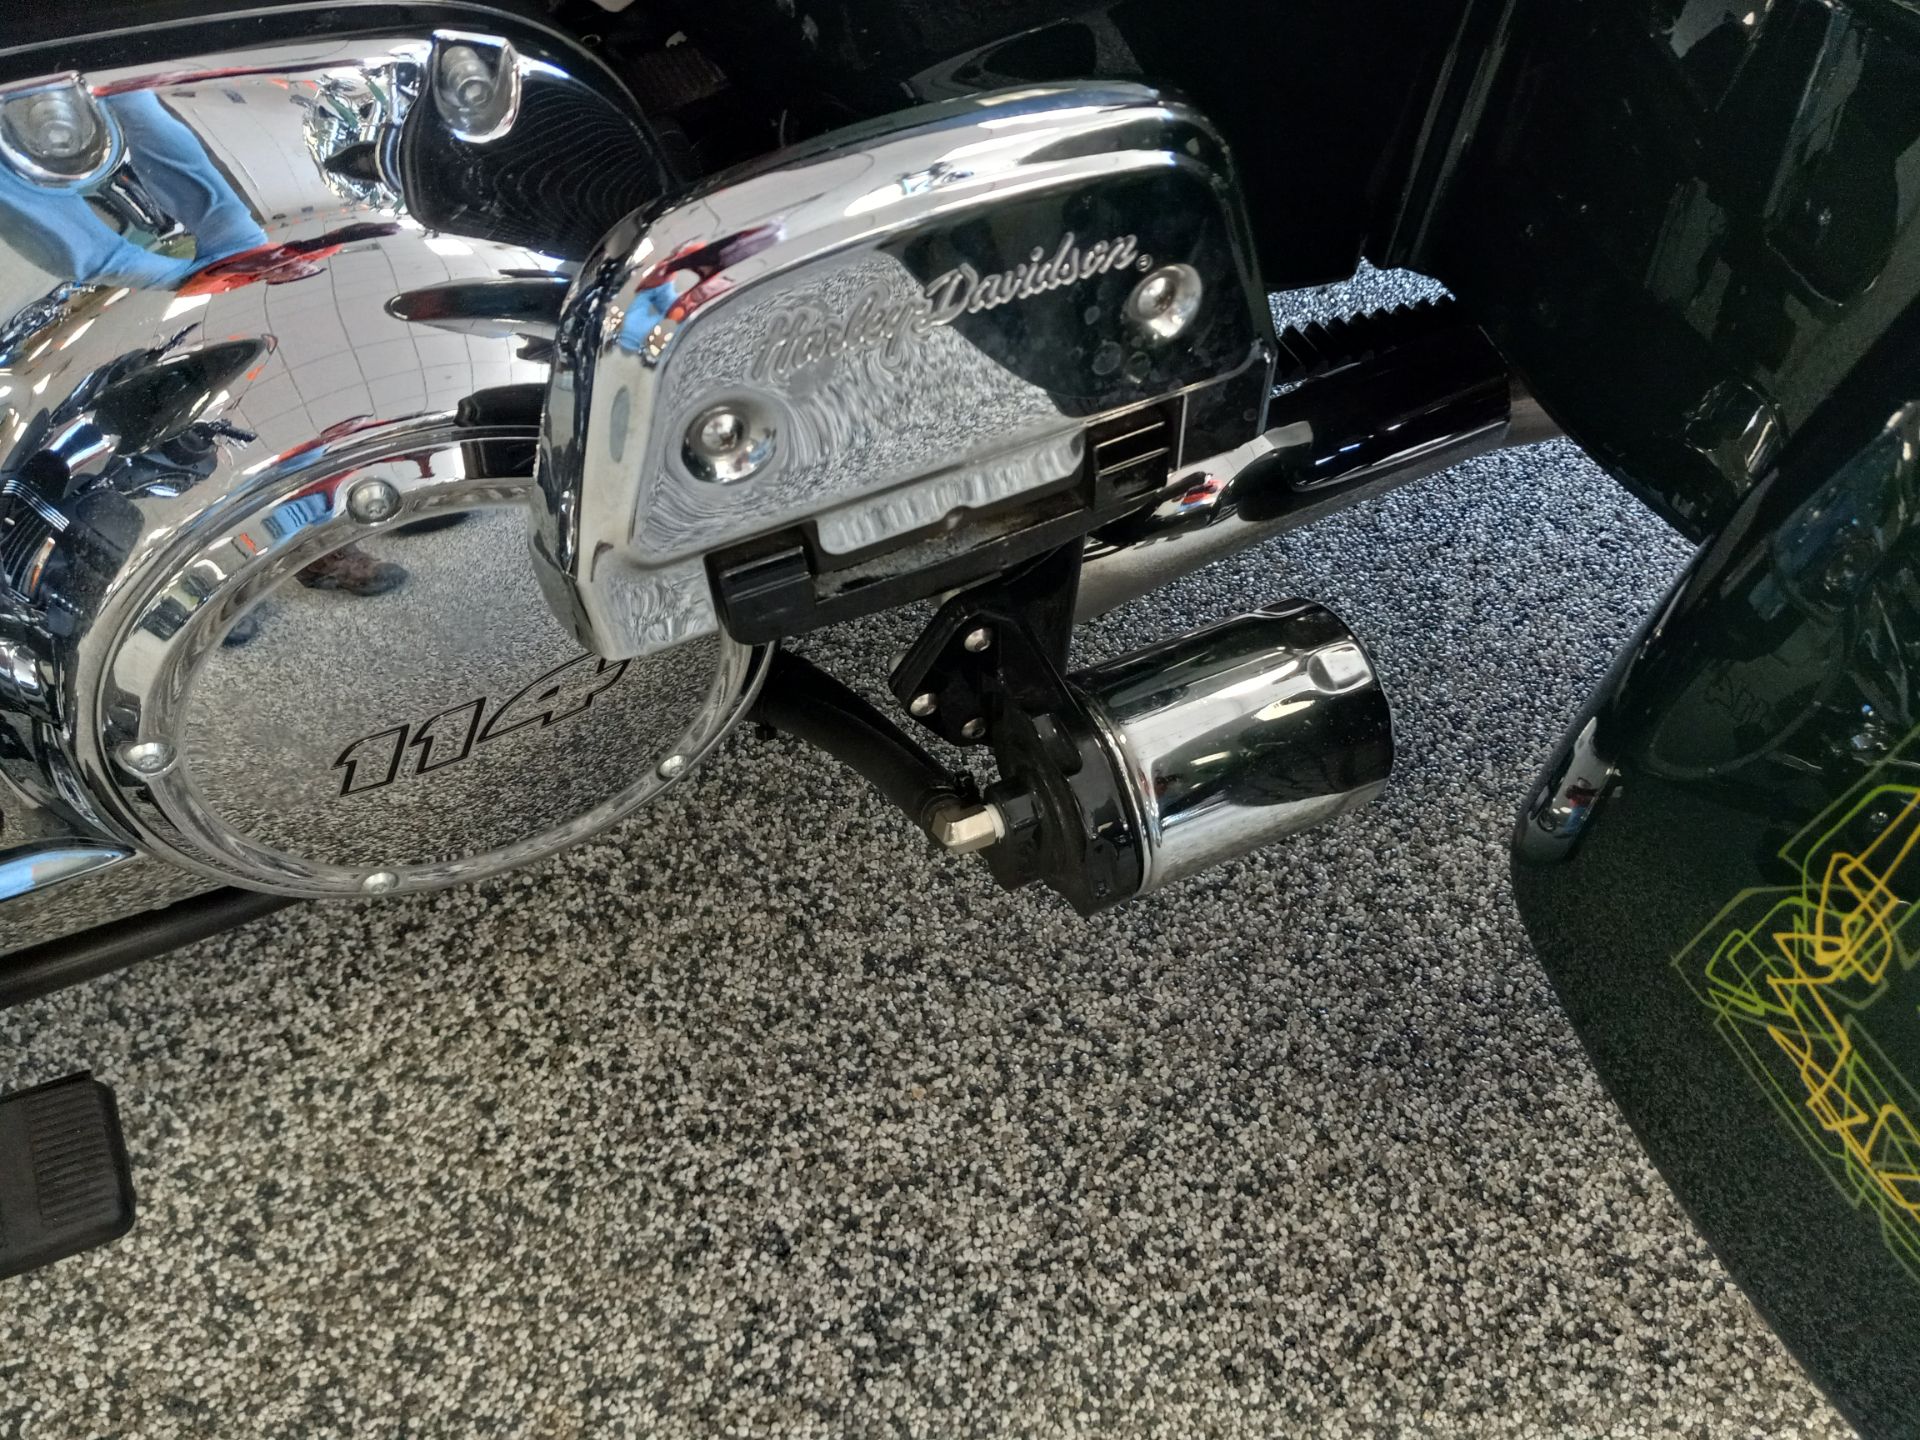 2019 Harley-Davidson Tri Glide® Ultra in Knoxville, Tennessee - Photo 14